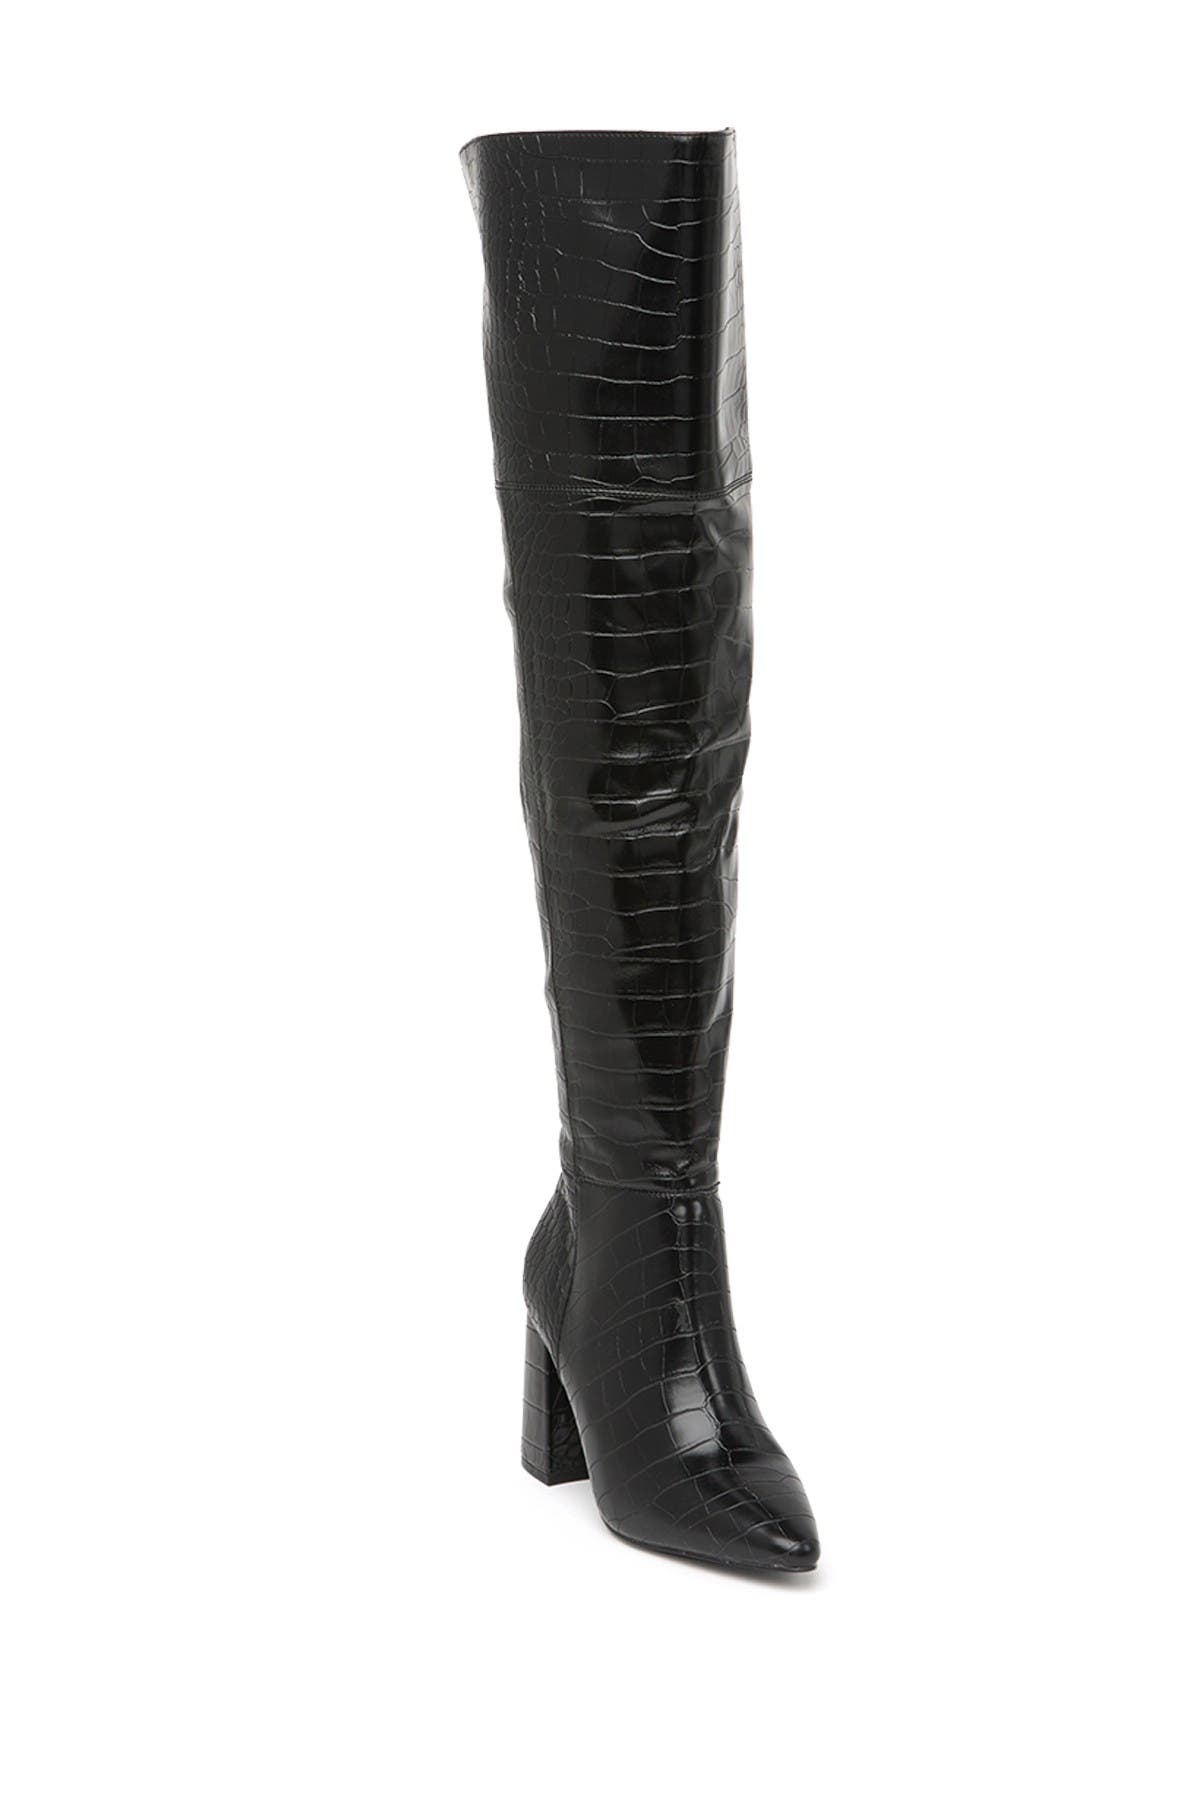 charles by charles david over the knee boot